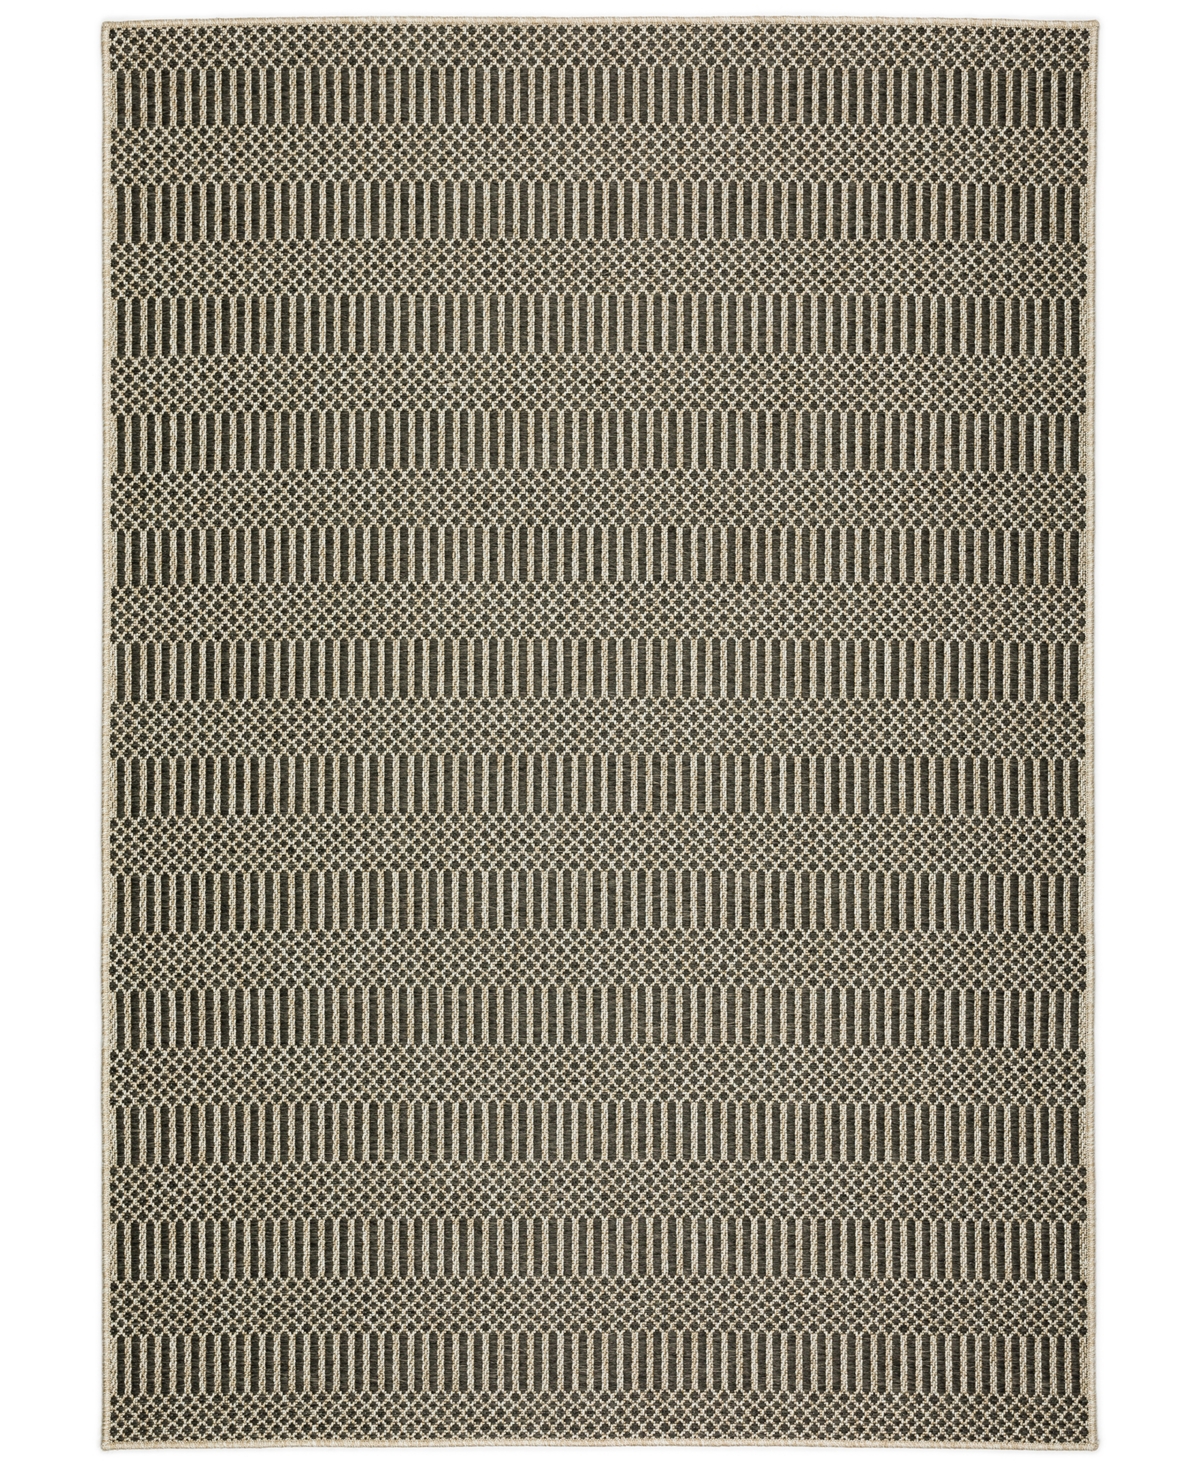 D Style Nusa Outdoor Nsa4 12' X 15' Area Rug In Charcoal